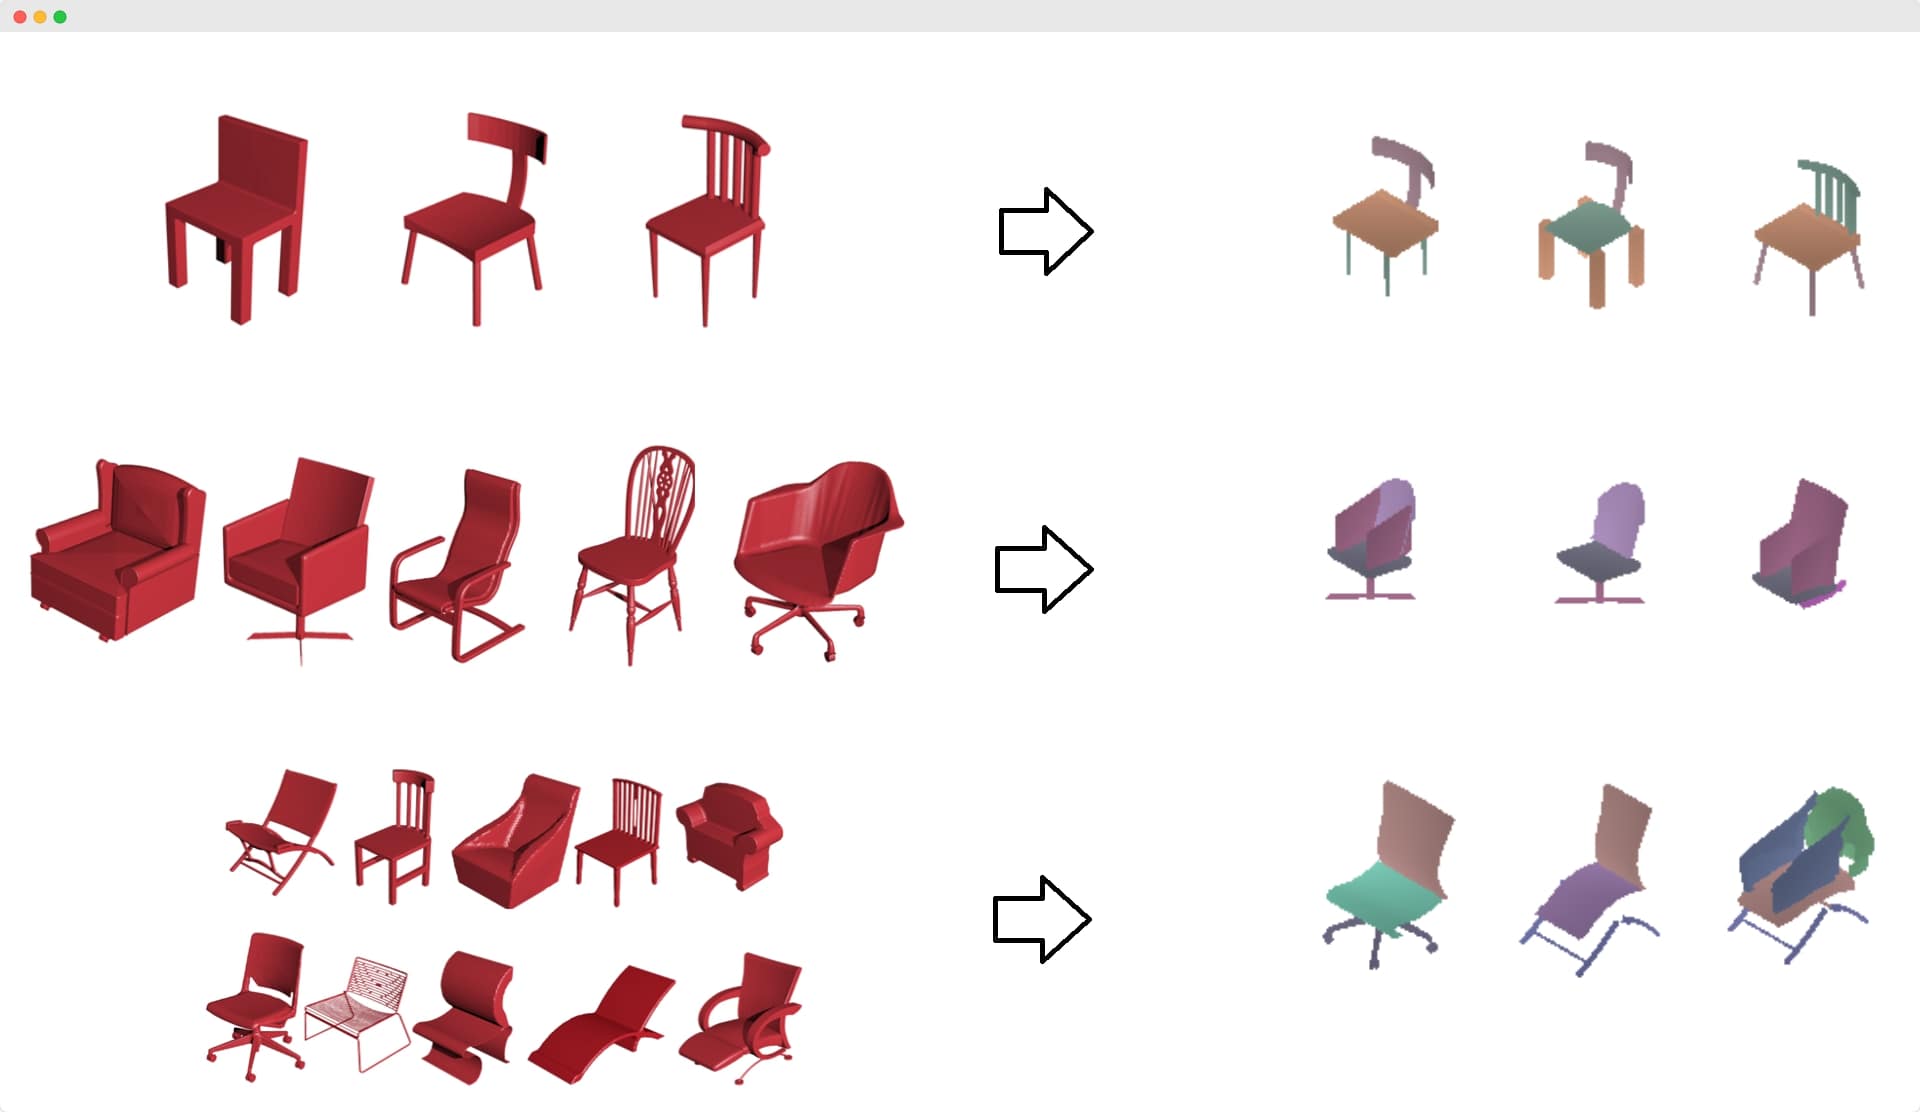 3D chair image